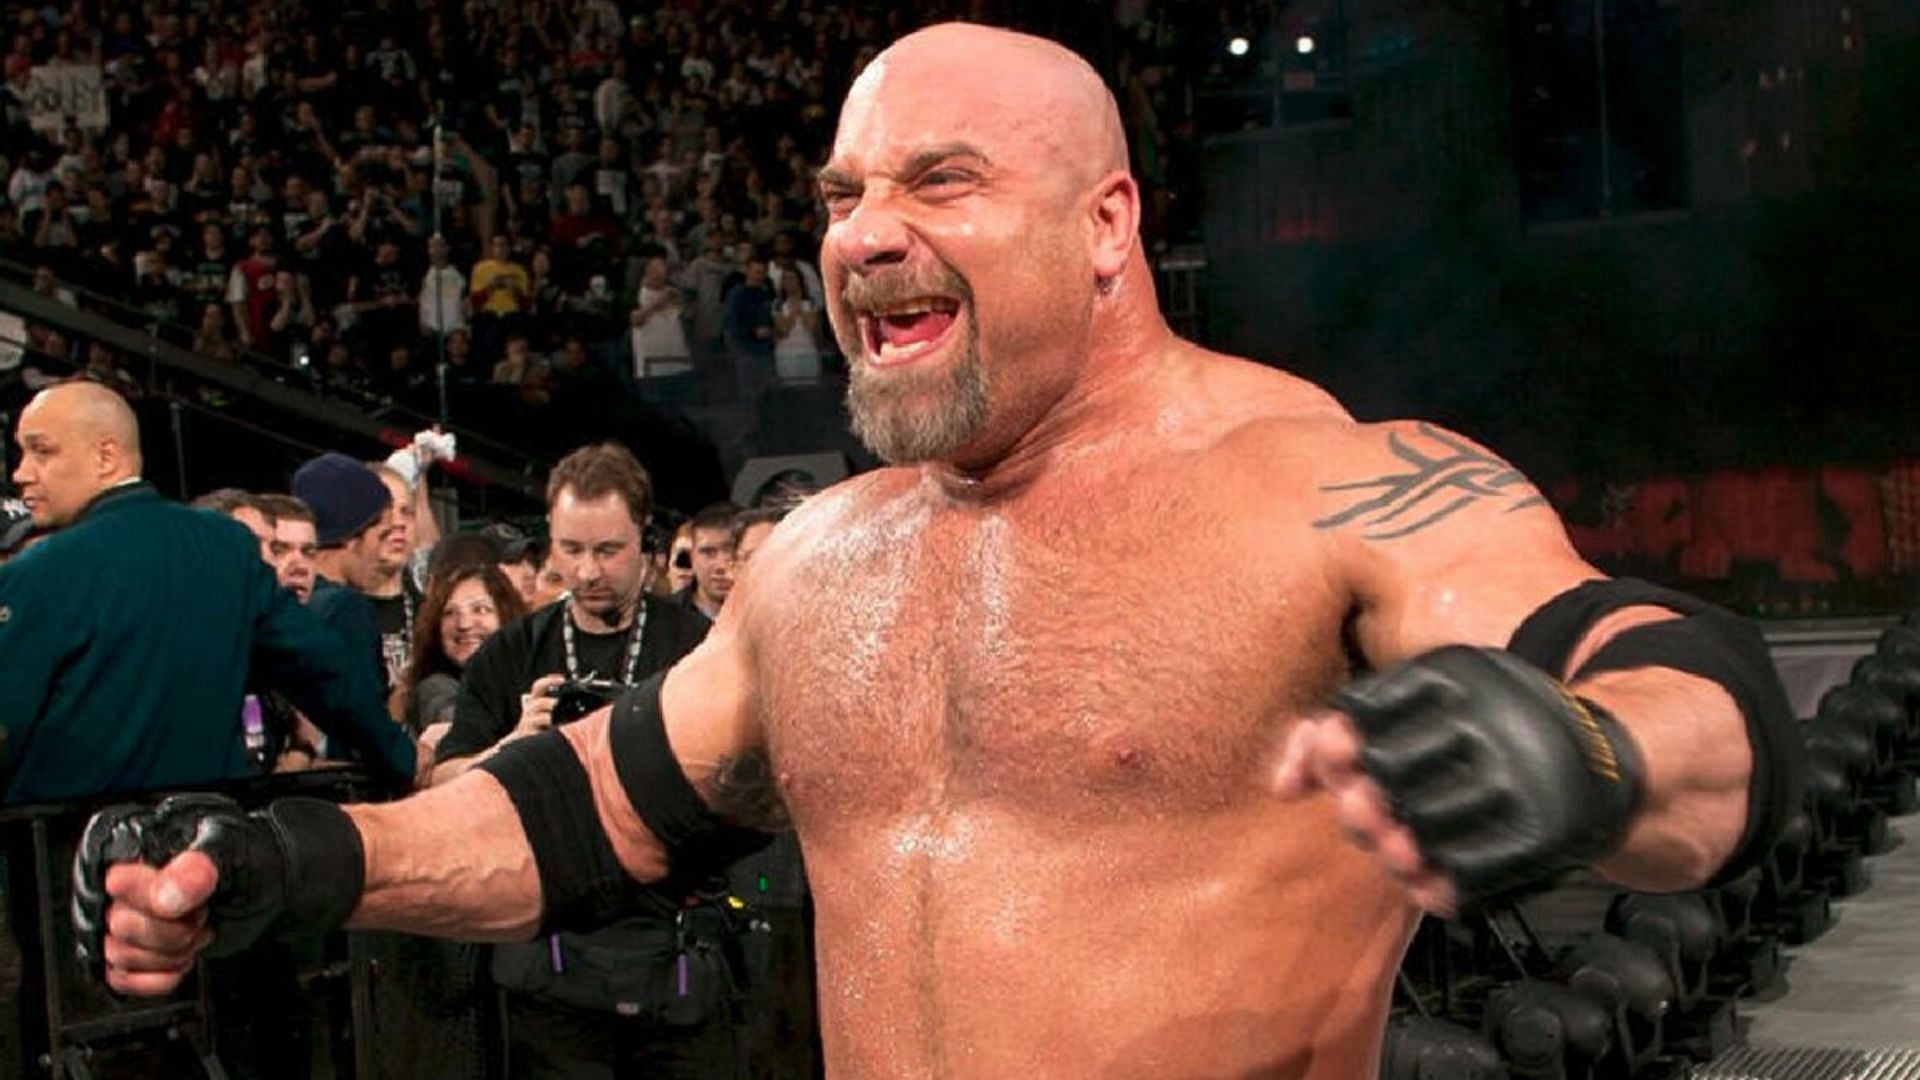 Could Goldberg be &quot;All Elite&quot; soon?